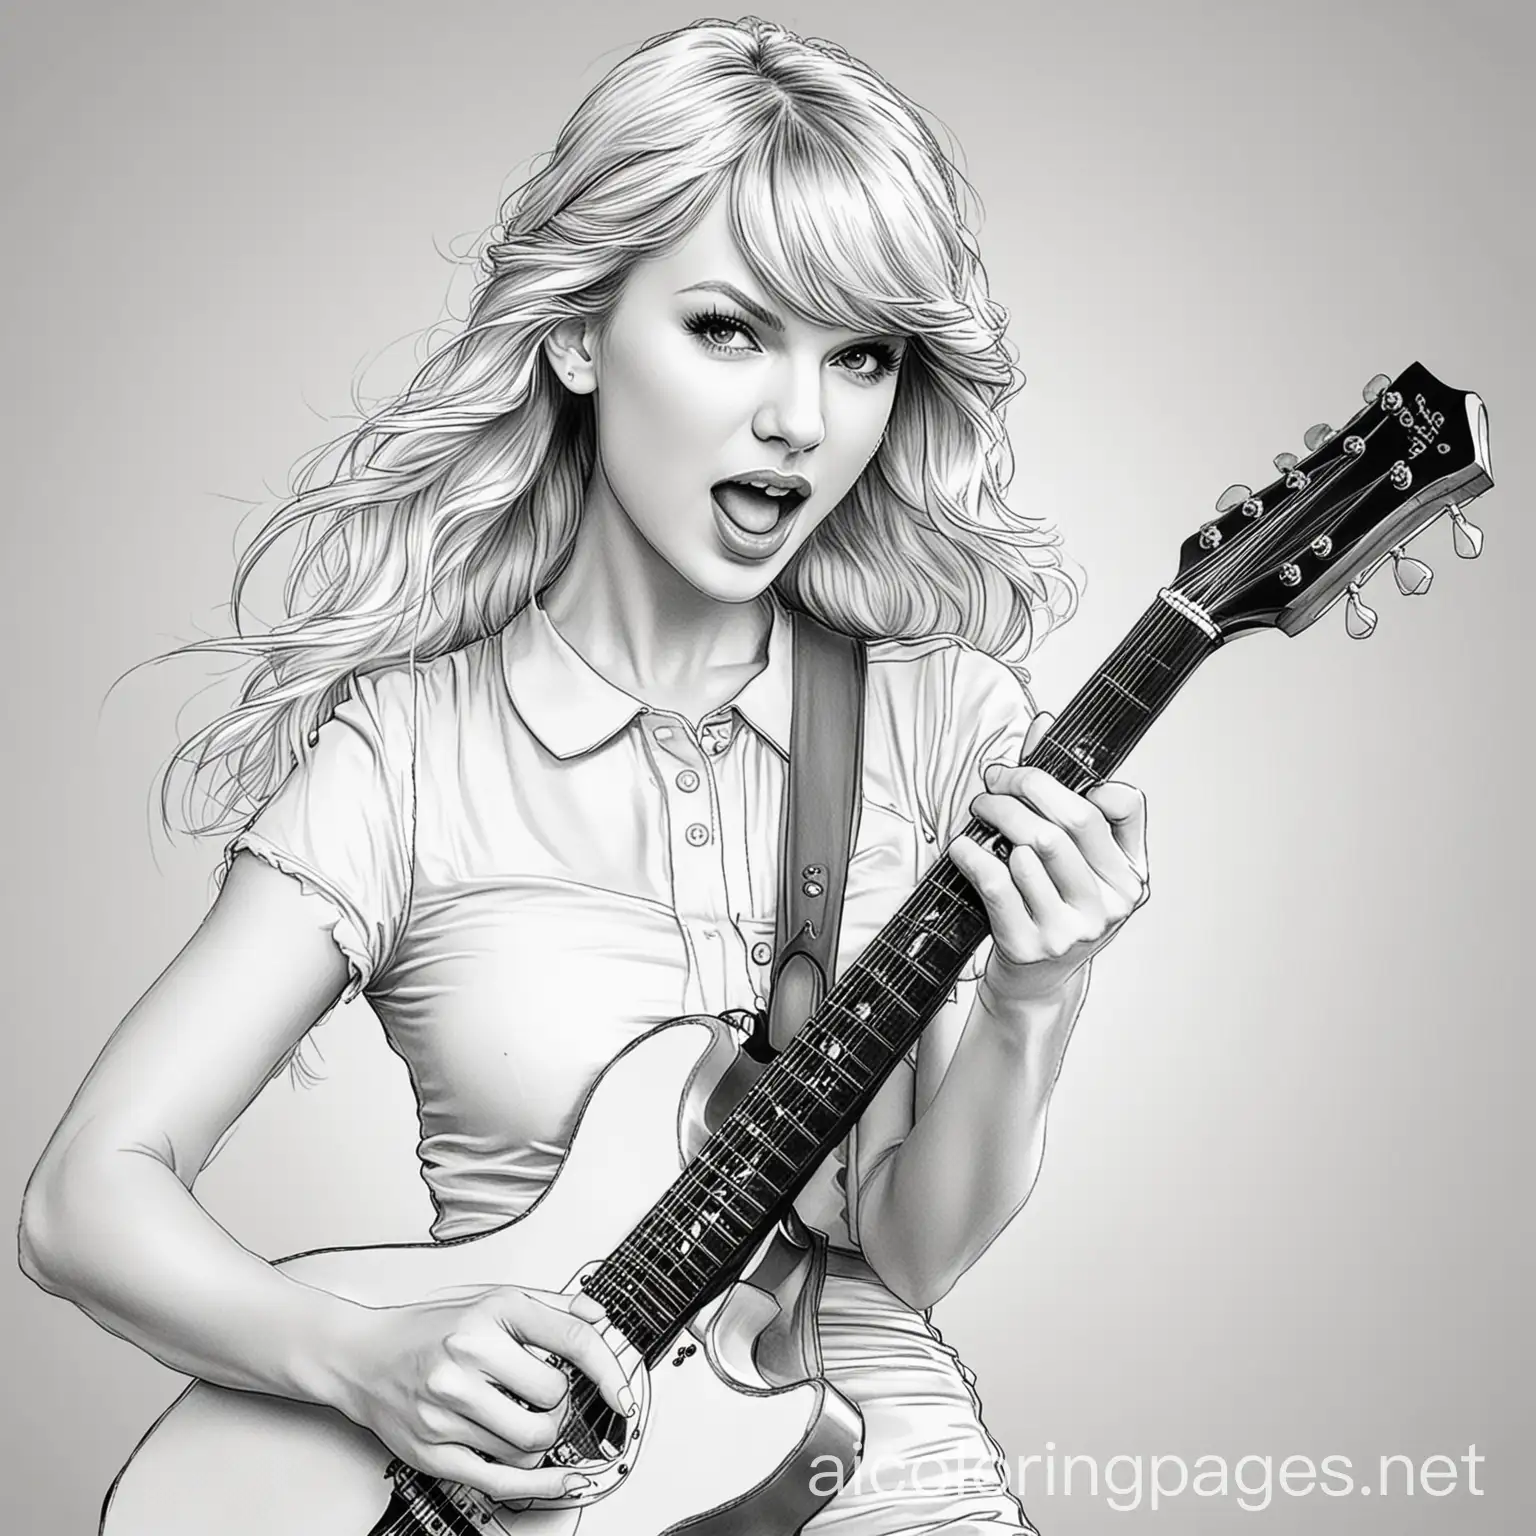 Coloring page of Taylor Swift with white hair singing playing guitar in comic style, Coloring Page, black and white, line art, white background, Simplicity, Ample White Space. The background of the coloring page is plain white to make it easy for young children to color within the lines. The outlines of all the subjects are easy to distinguish, making it simple for kids to color without too much difficulty